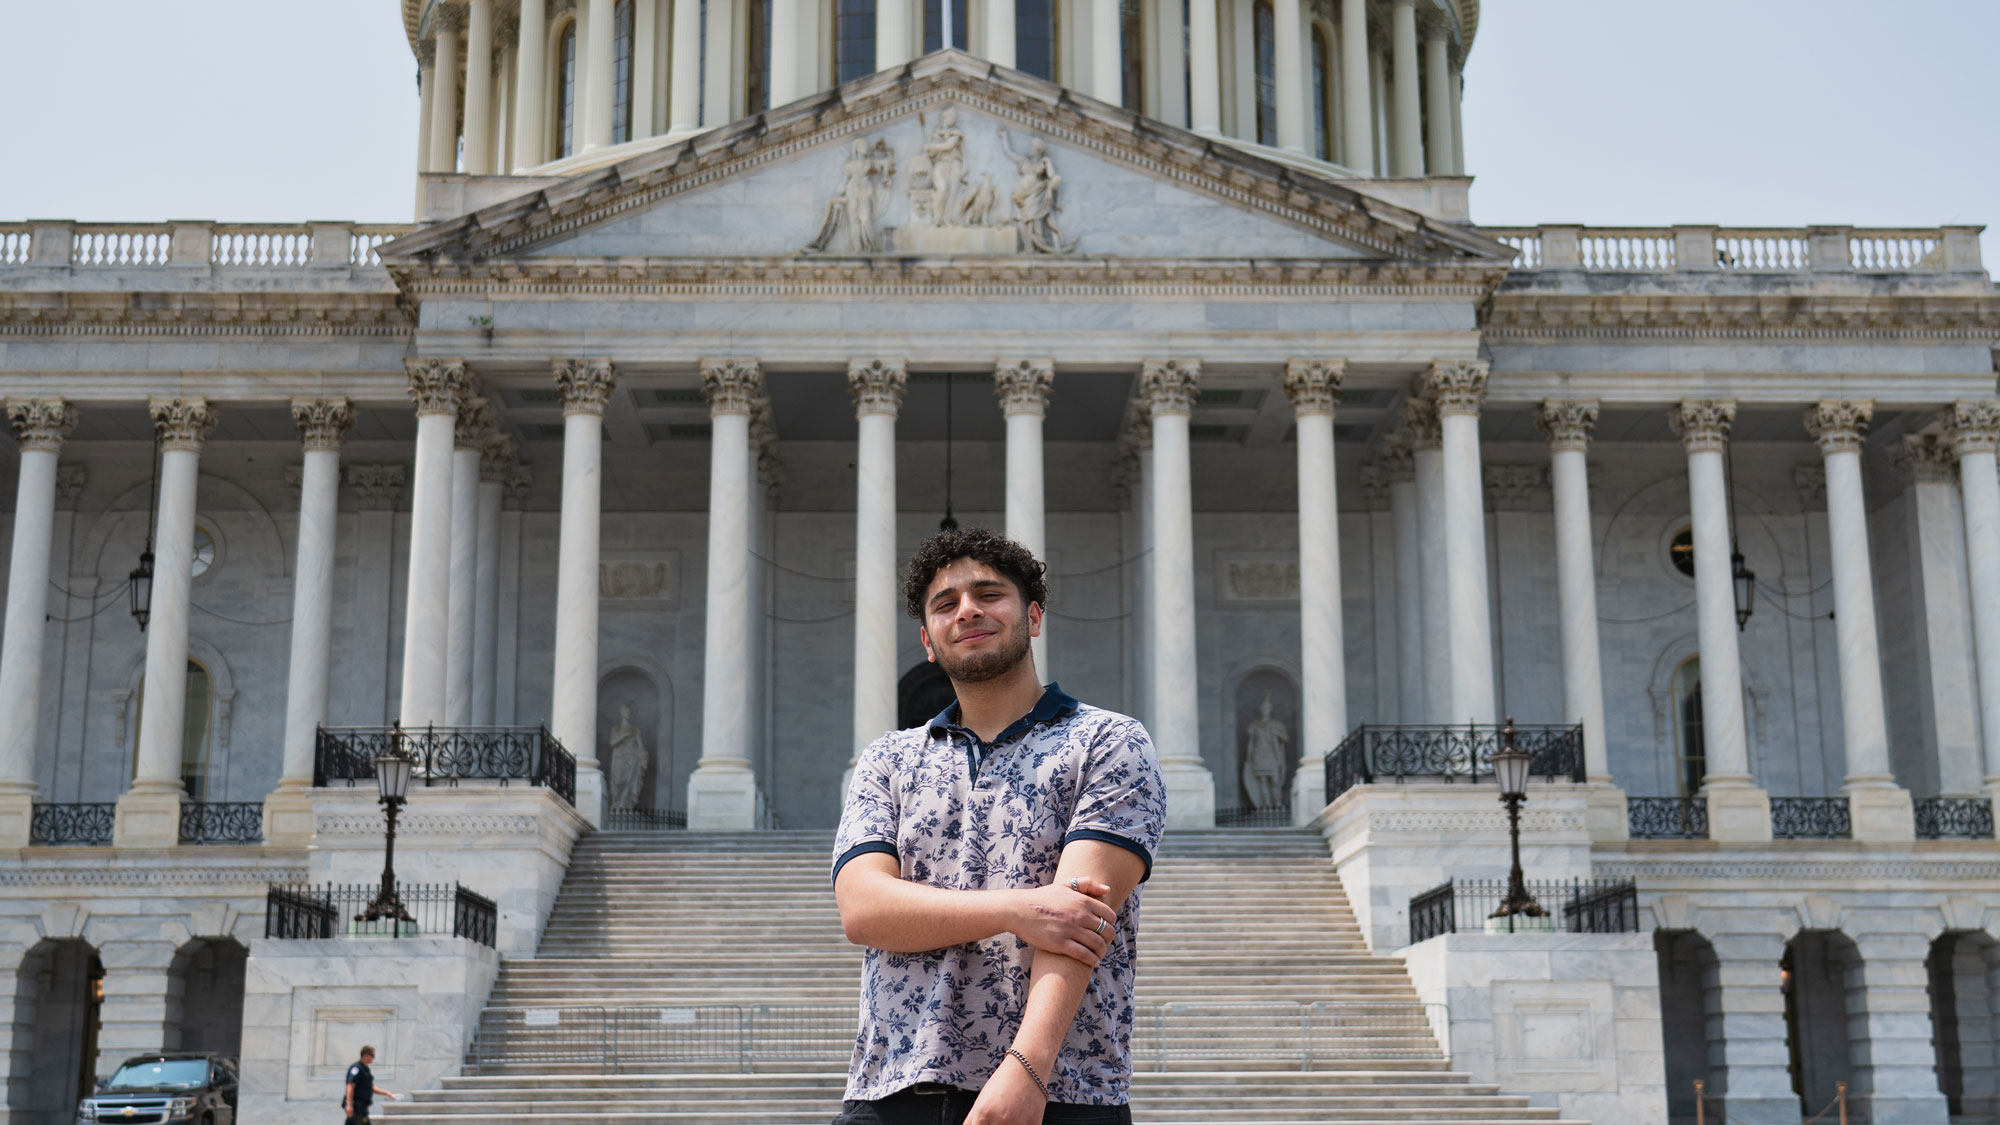 Anthony Jeer in front of the capital building in Washington DC